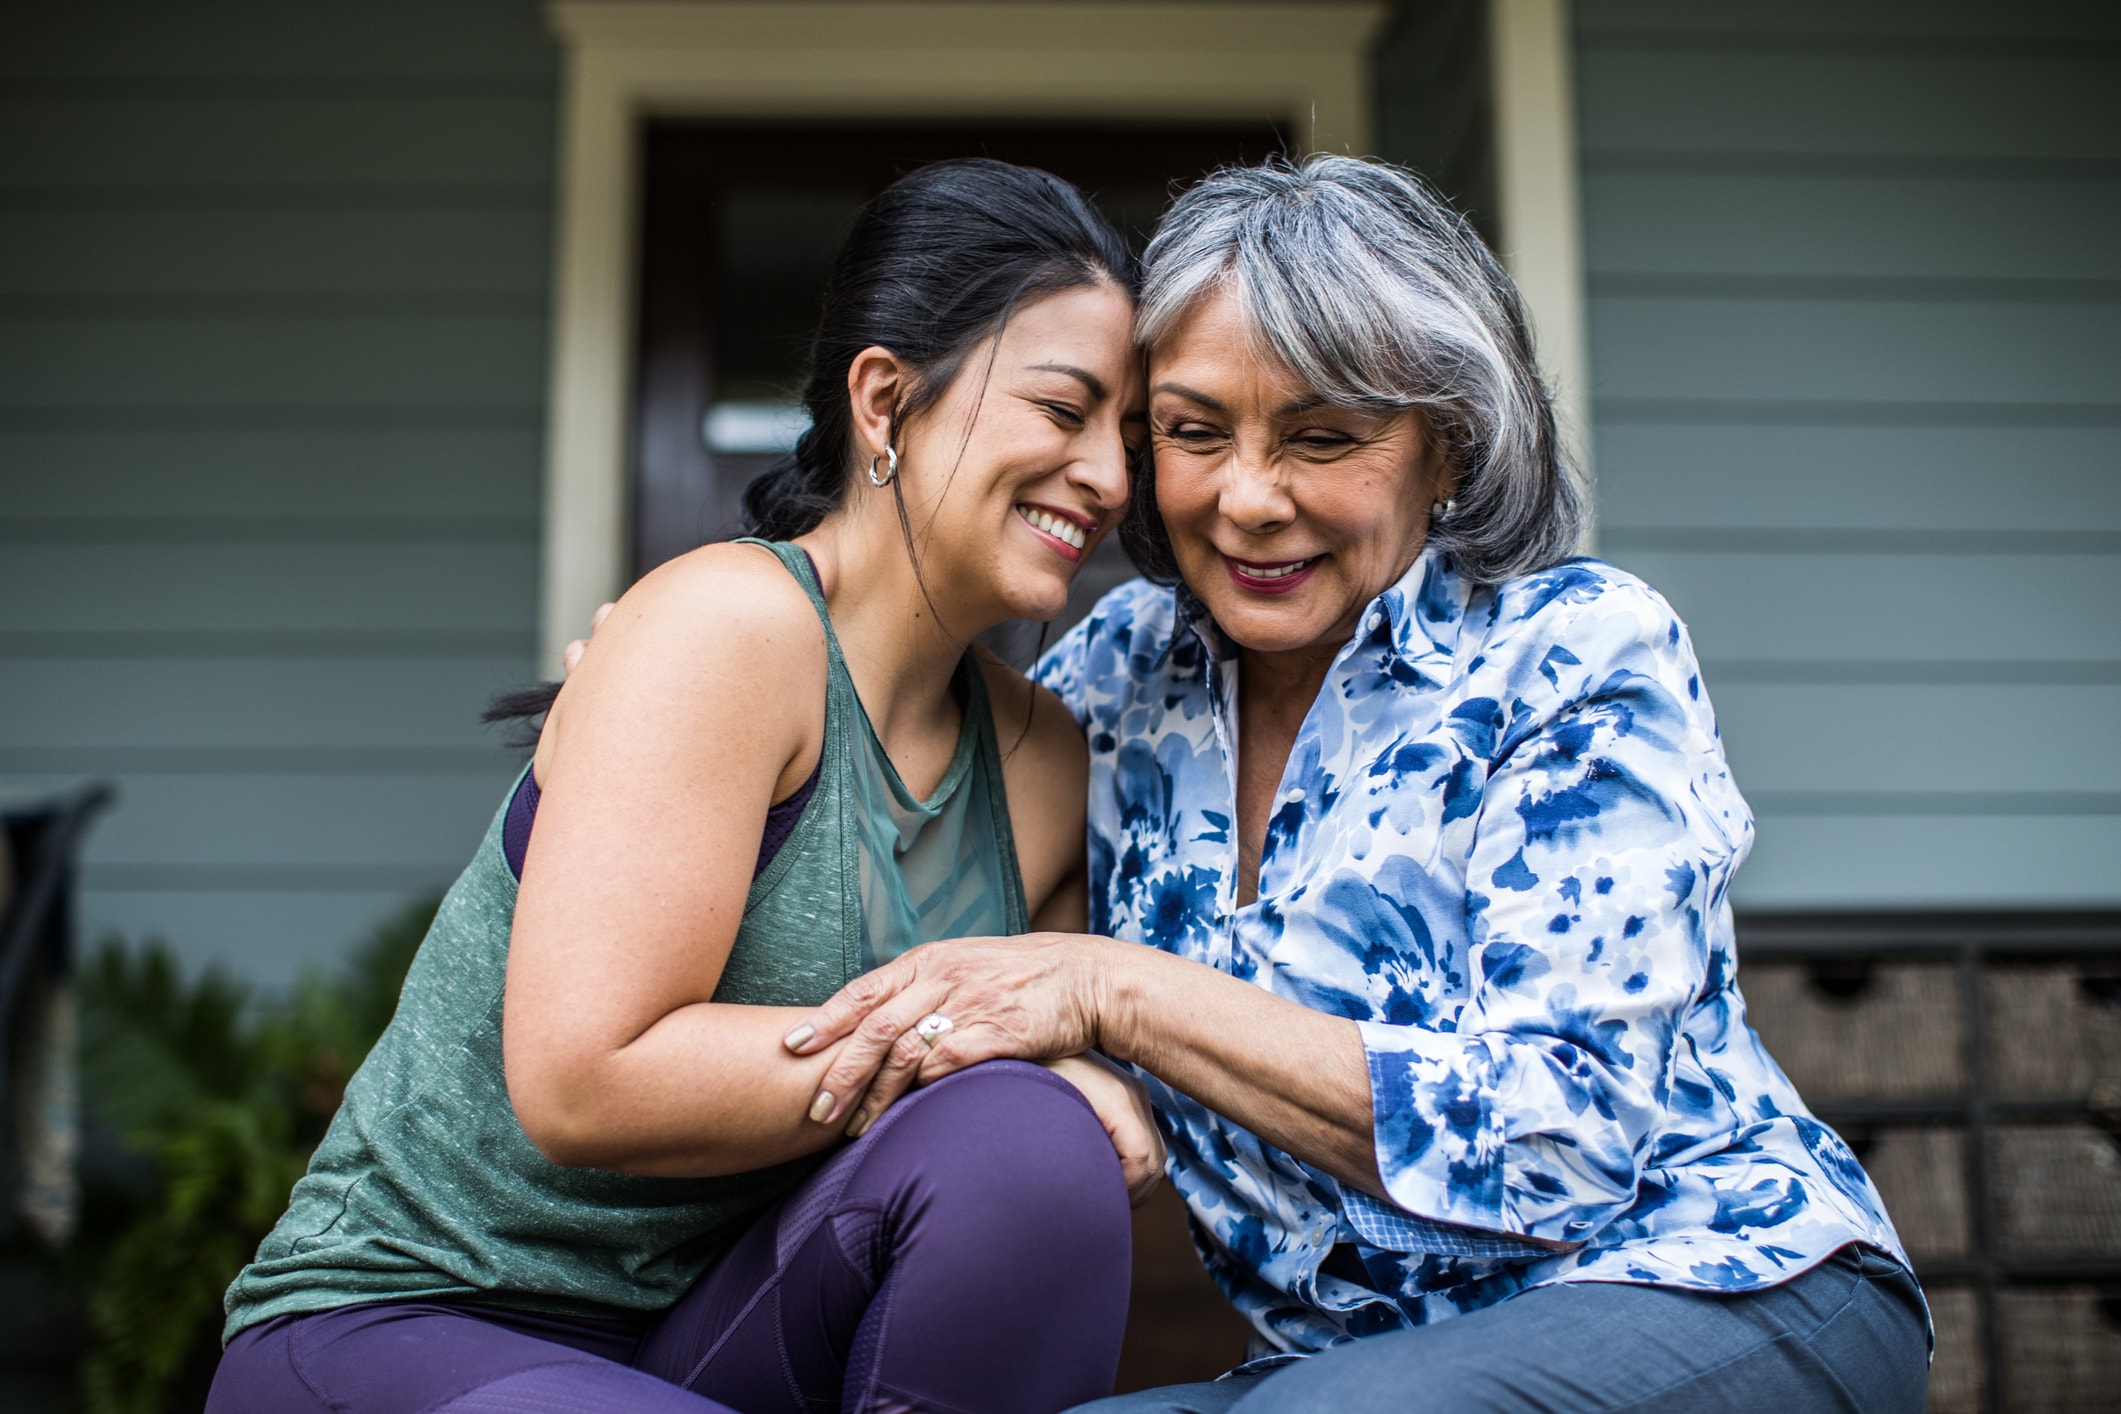 Nine tips for aged caregivers to ease communication with families